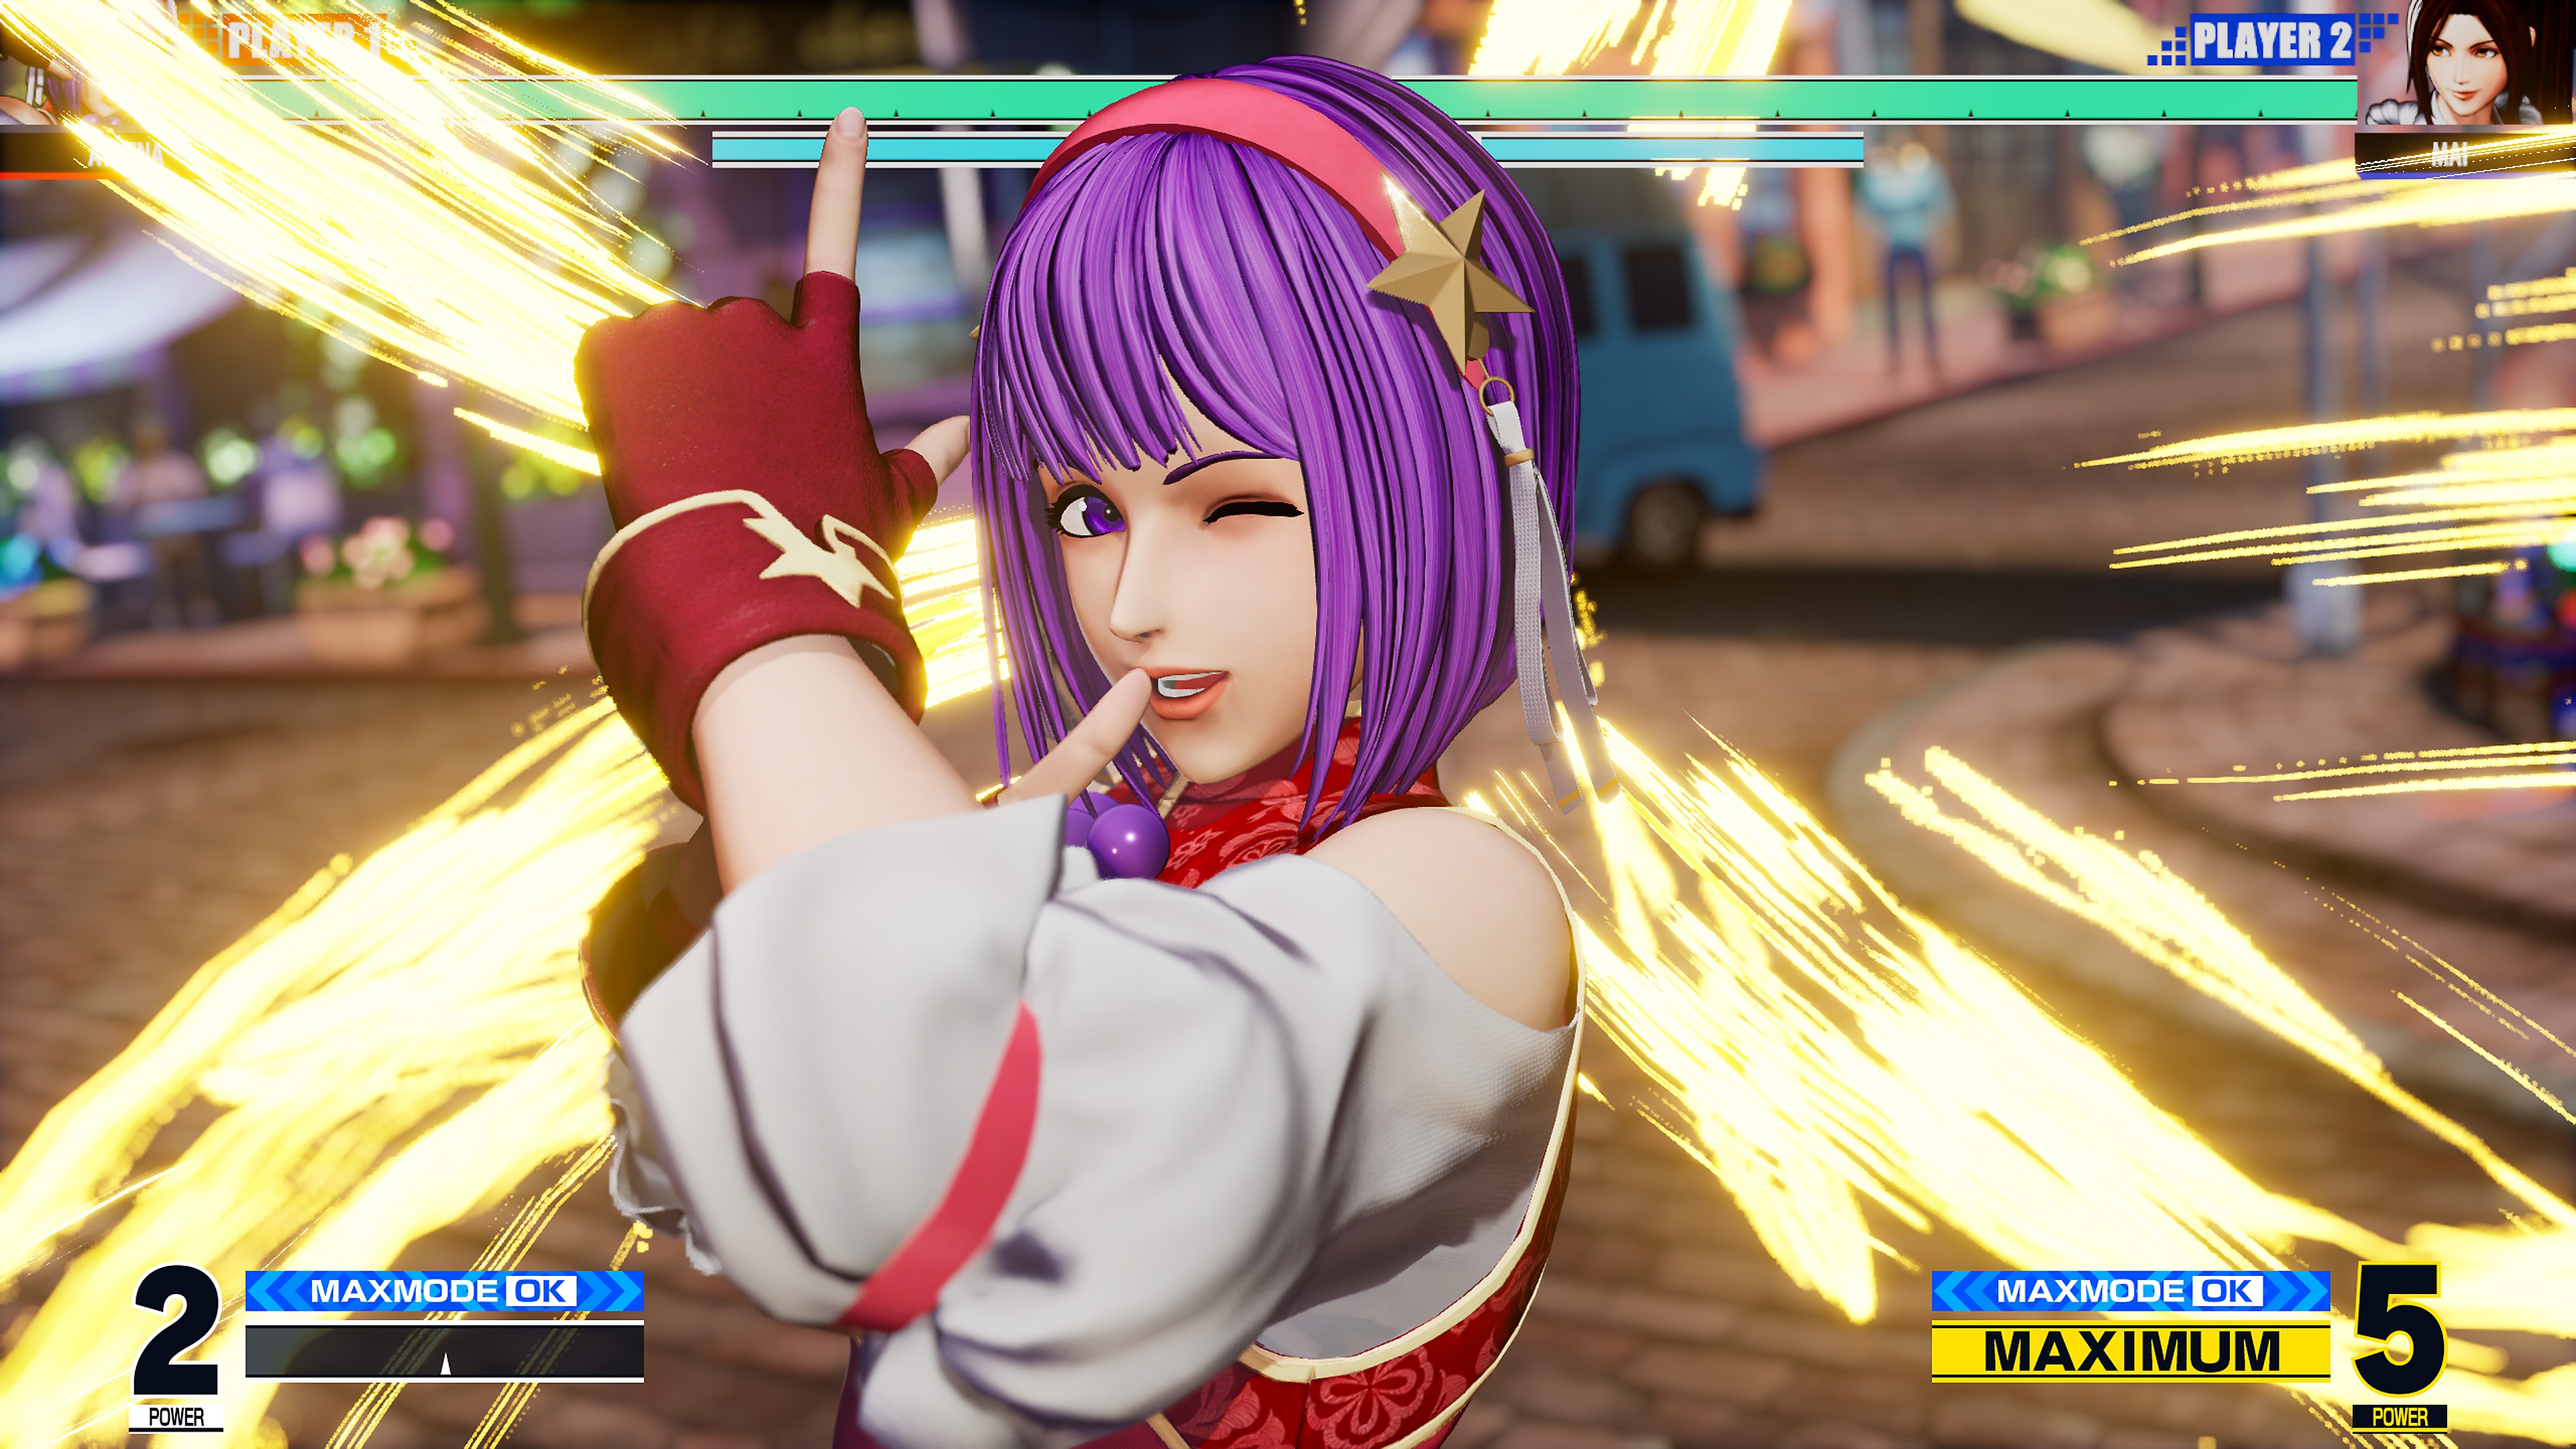 《The King of Fighters XV》- 图库截屏4